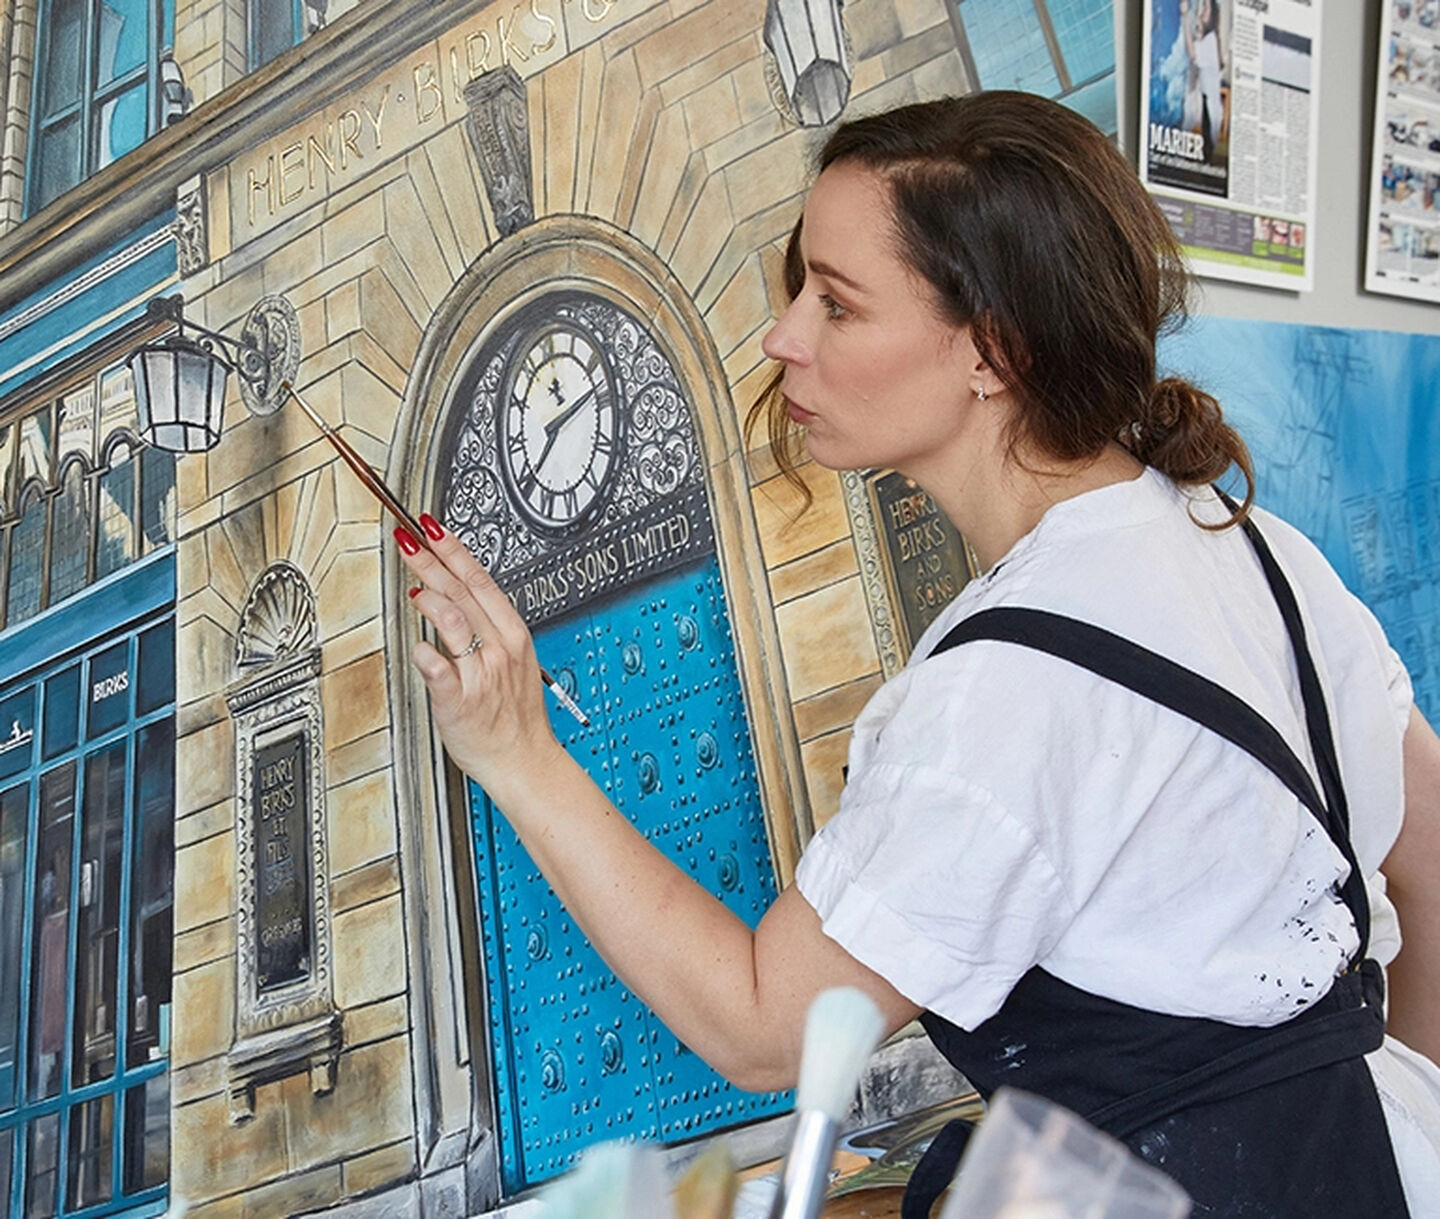 Artist Stephanie Goulet painting the iconic Maison Birks storefront